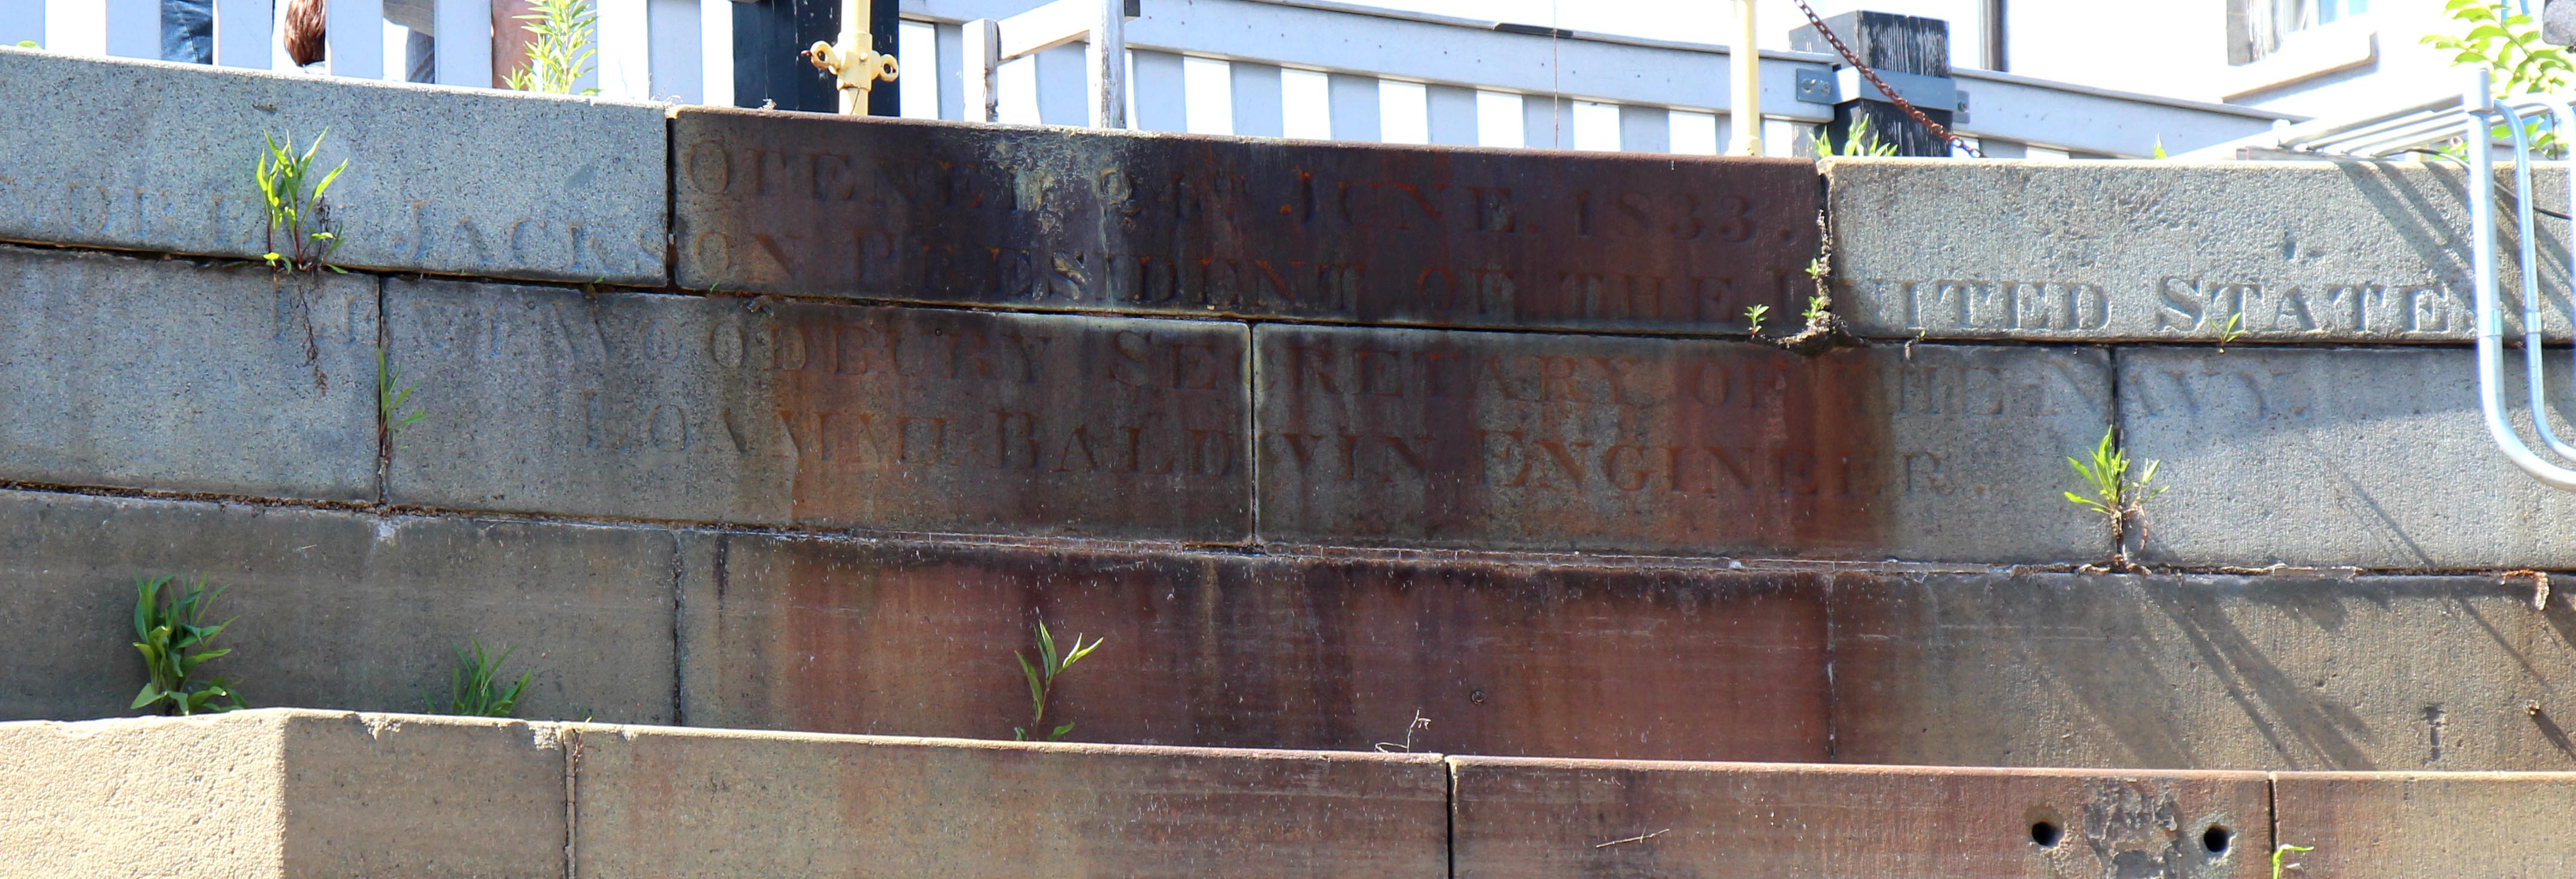 Inscription at the head of Dry Dock 1. [Courtesy USS Constitution Museum]